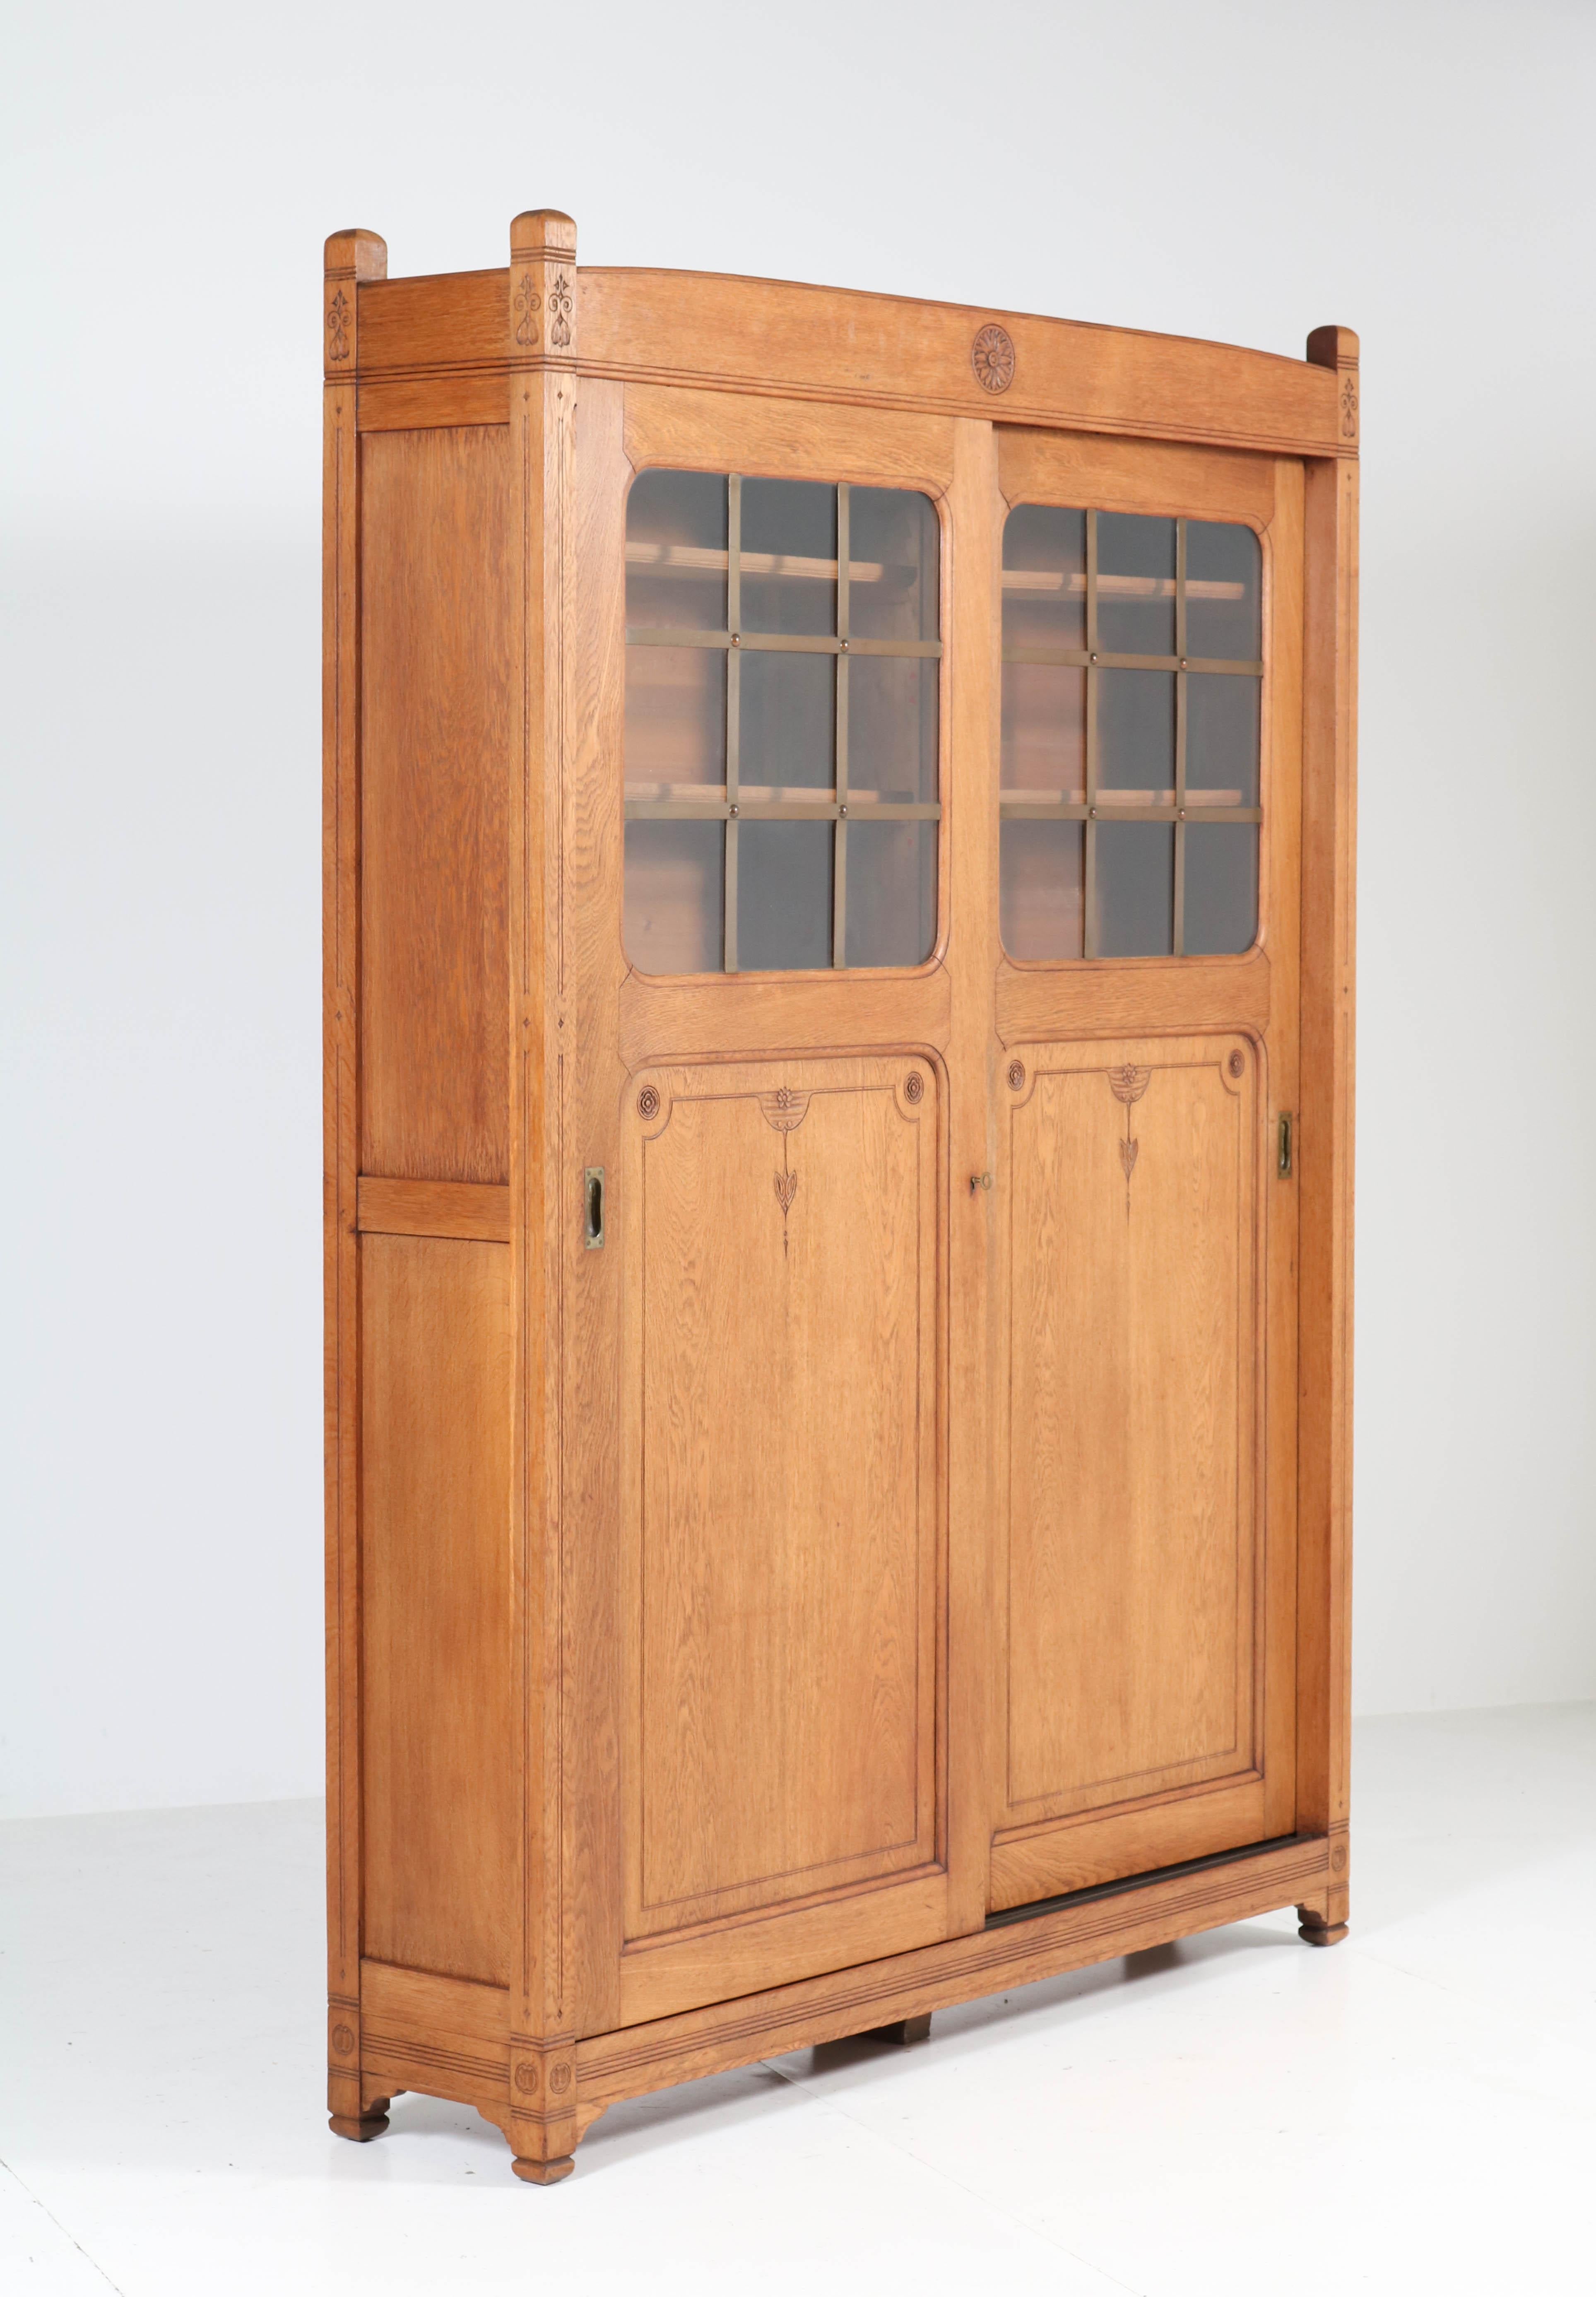 Wonderful and rare Arts & Crafts Art Nouveau bookcase.
Striking Dutch design from the 1900s.
Solid oak with two original sliding doors.
Both doors have the original glass and brass lining.
This bookcase can be dismantled for safe transport.
12